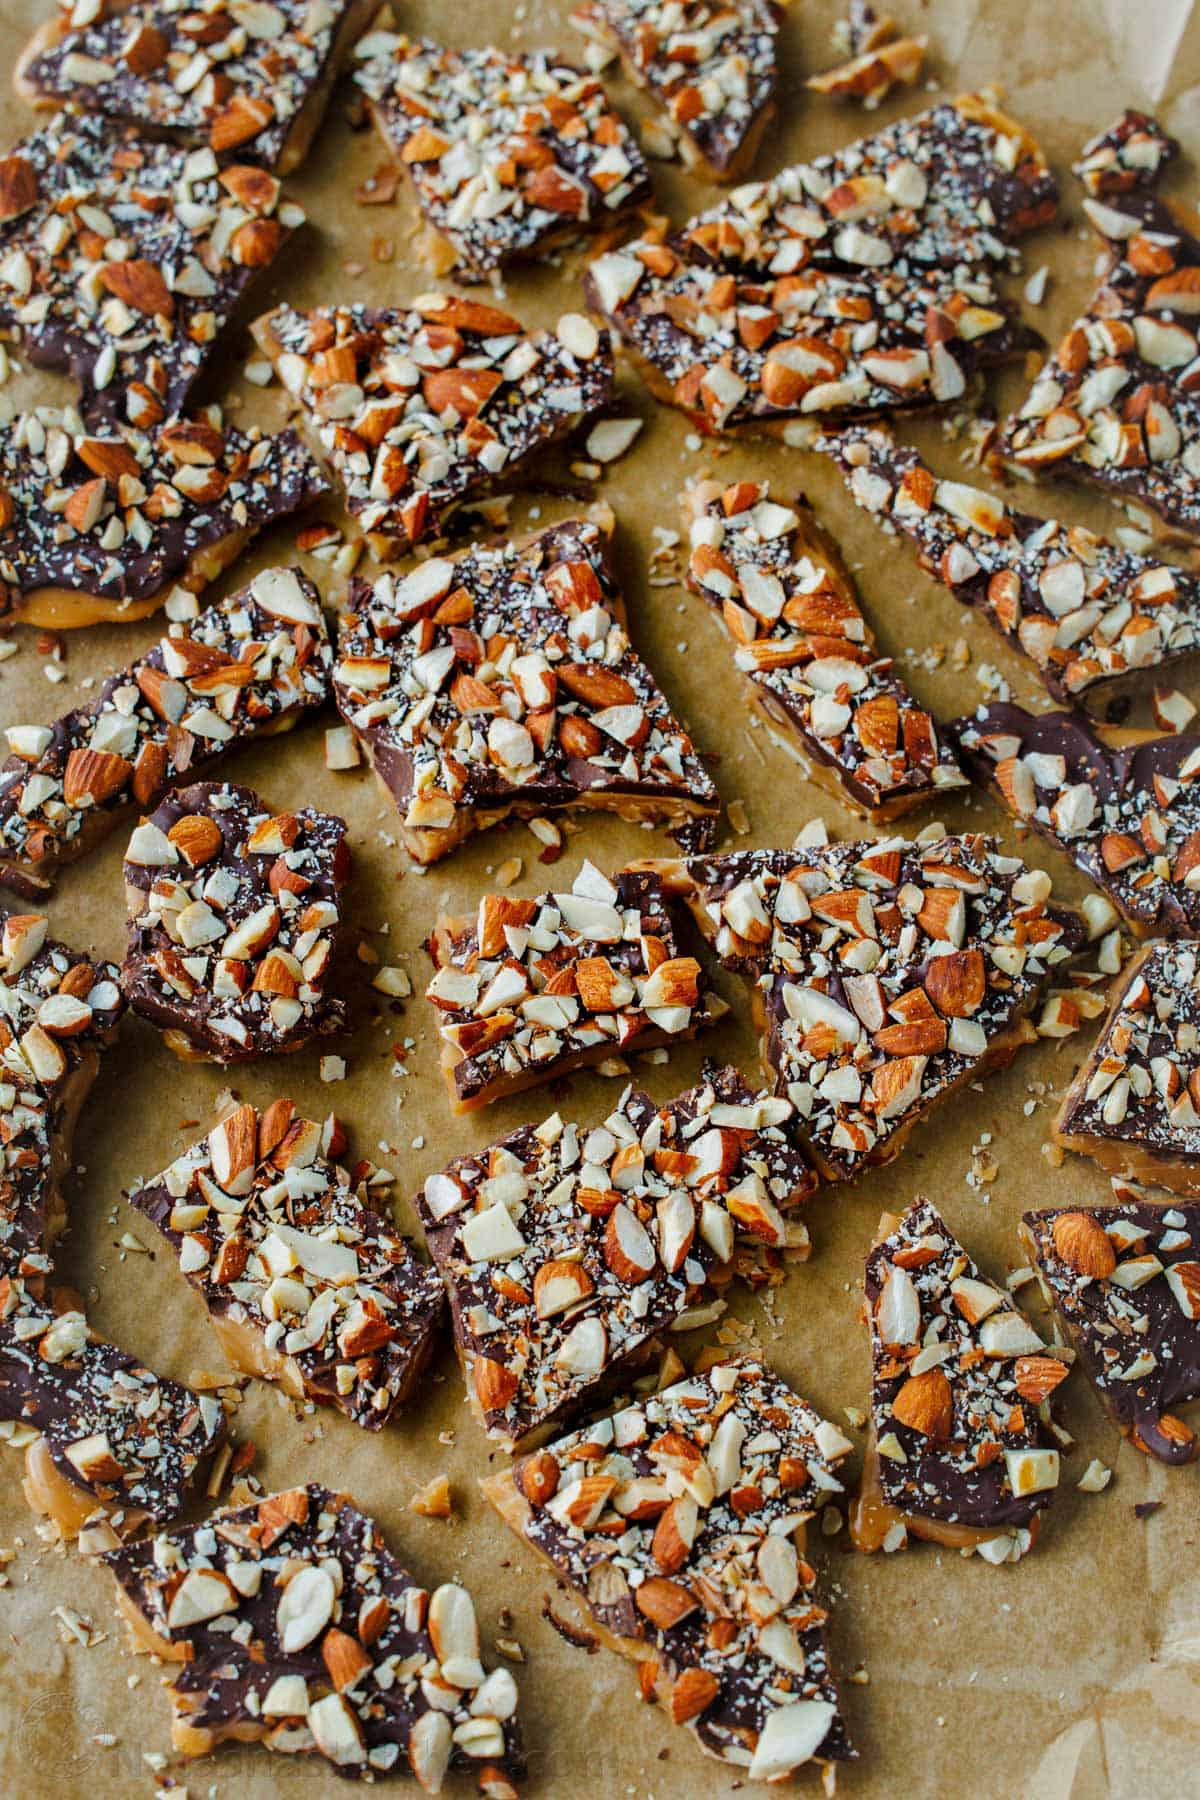 Broken up pieces of English Toffee on a baking sheet